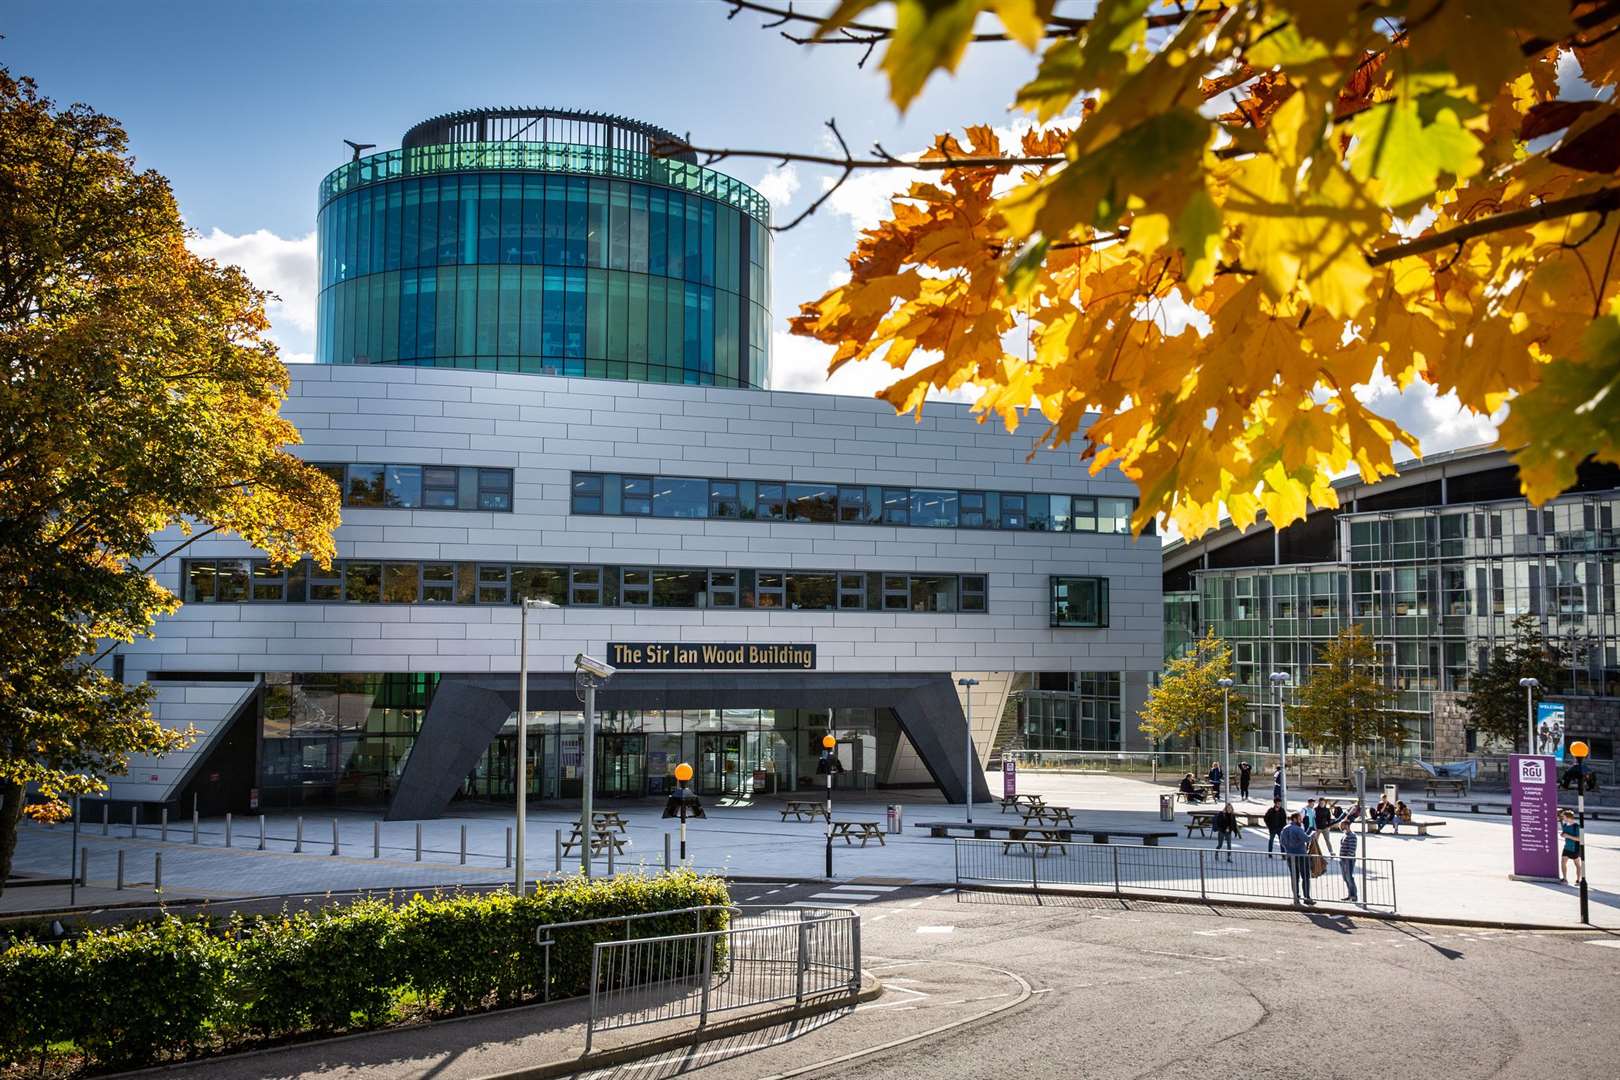 Robert Gordon University has been awarded £1.7 million as part of the recently announced Economic Recovery and Skills Fund for north-east Scotland.